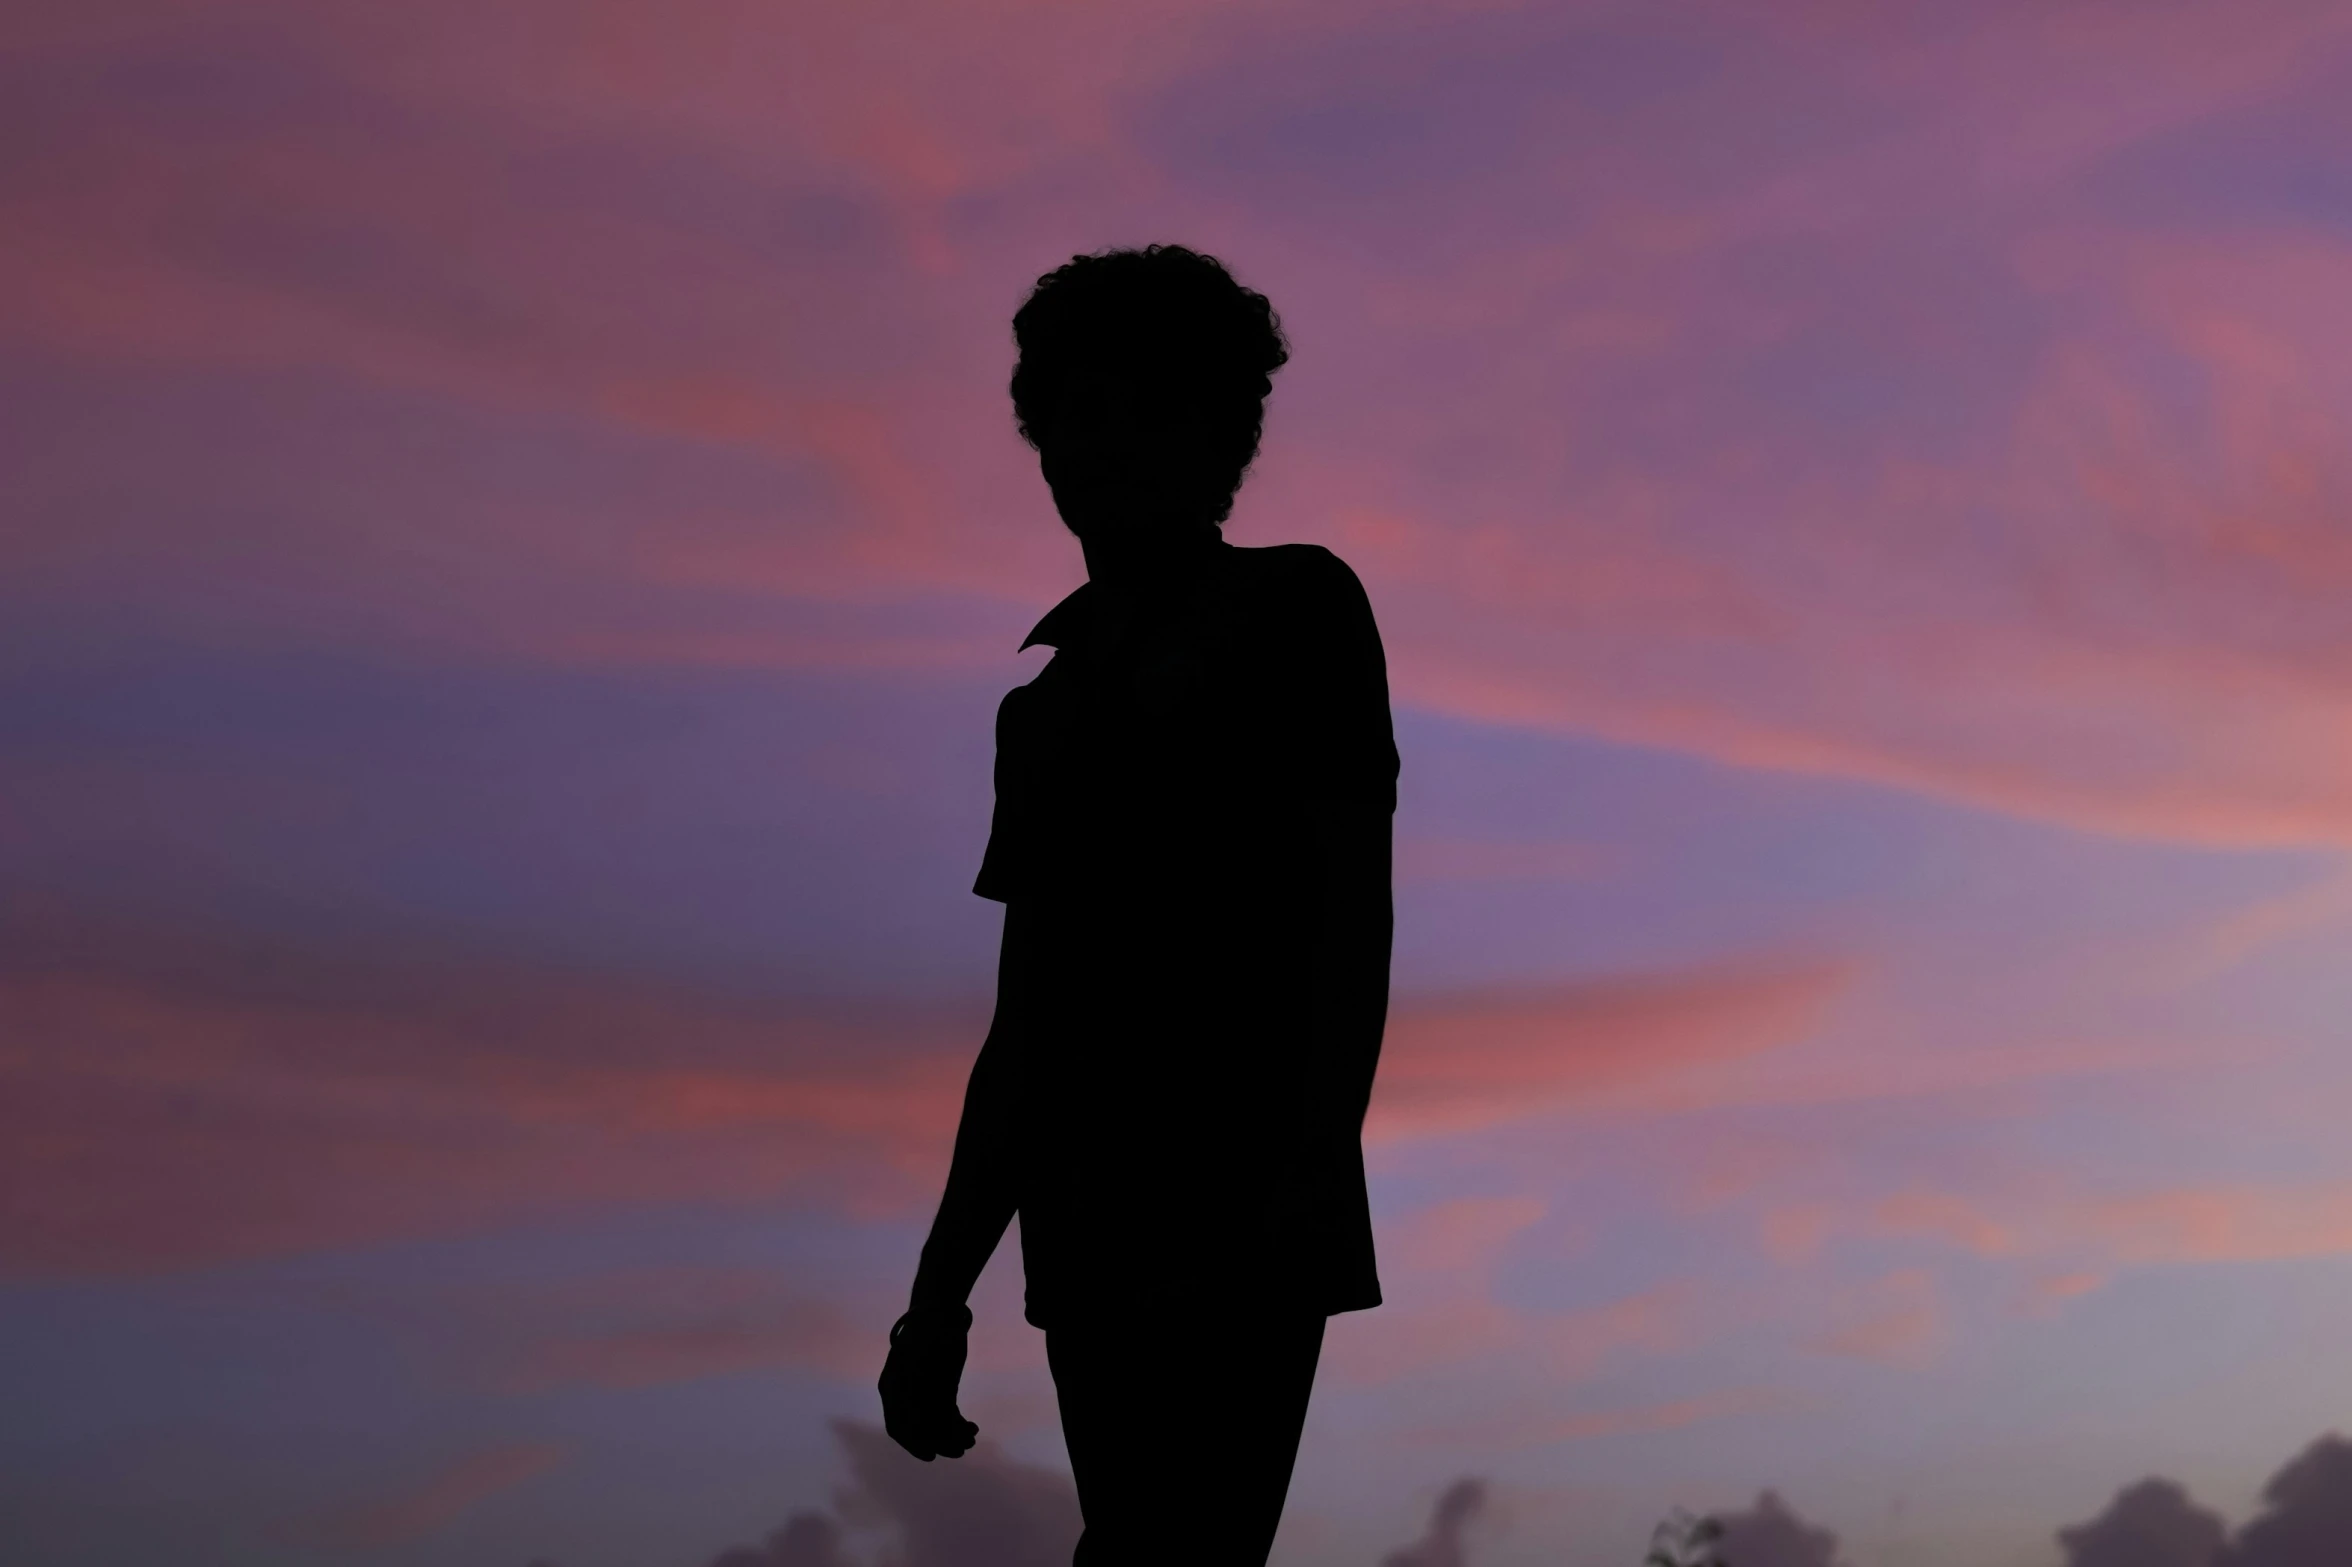 the silhouette of a person standing in the evening